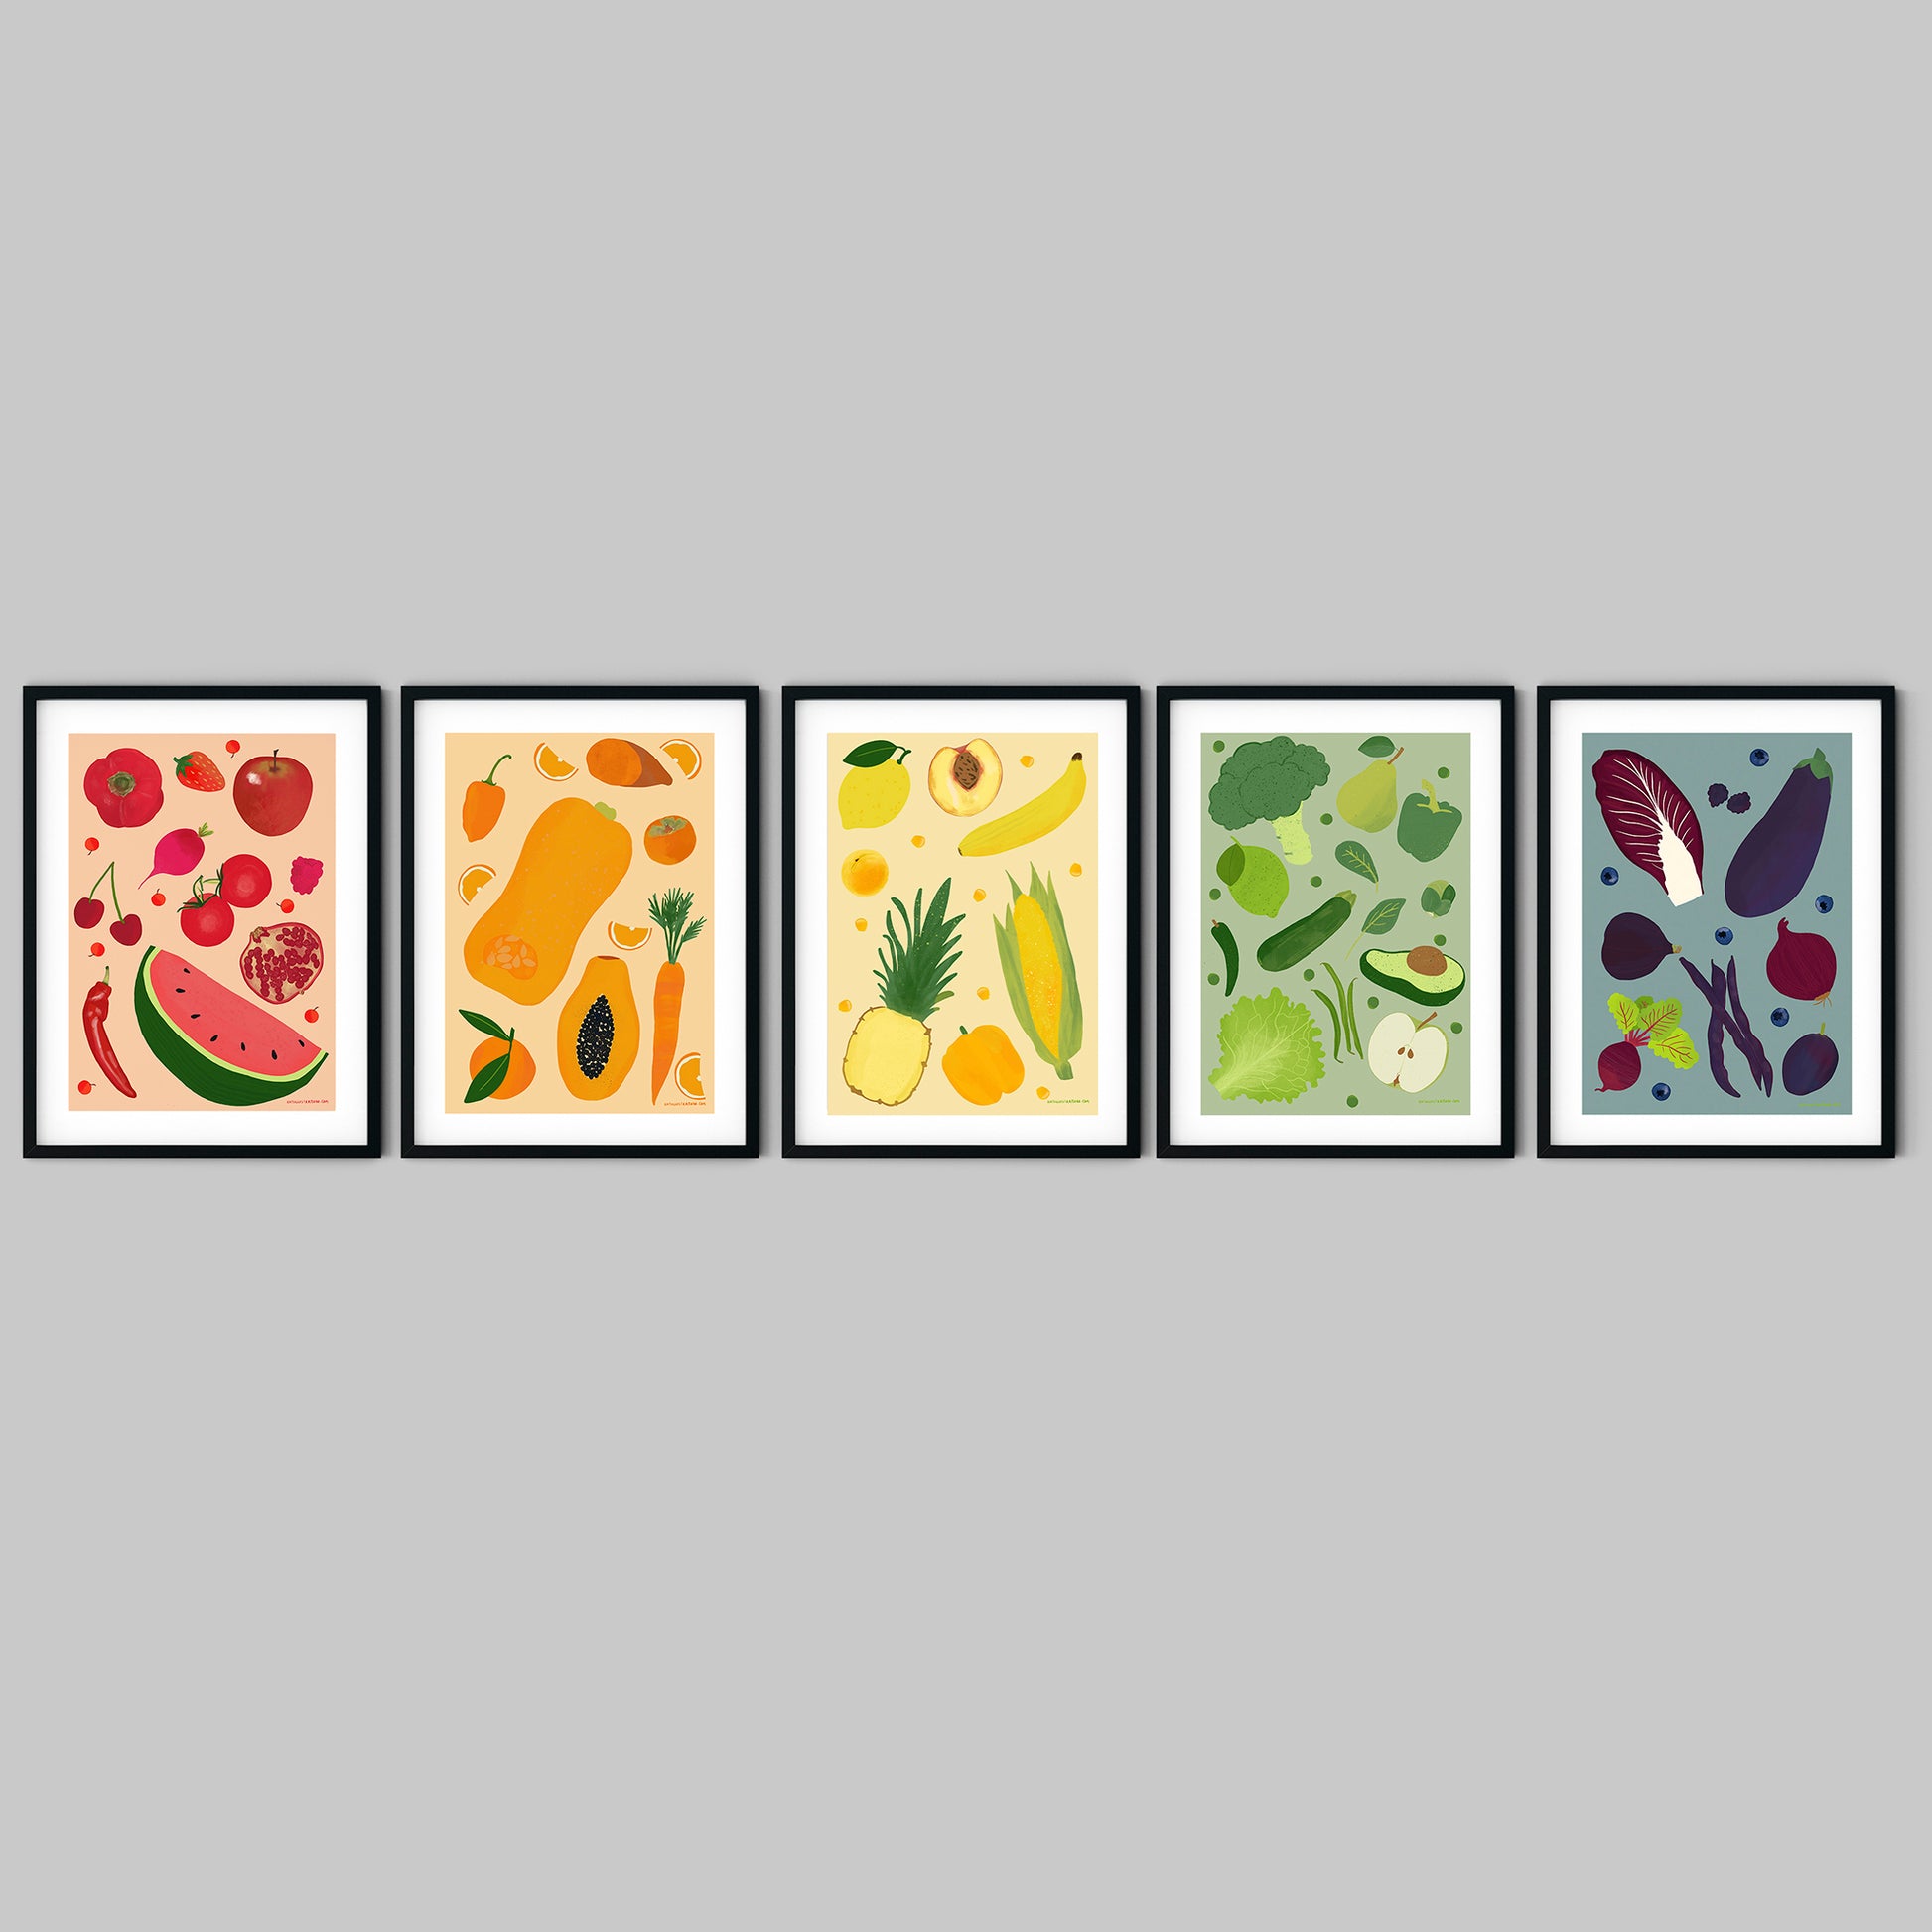 Image of a set of 5 framed art prints of fruit and vegetables. Each print is a different colour theme, red, orange, yellow, green and purple.